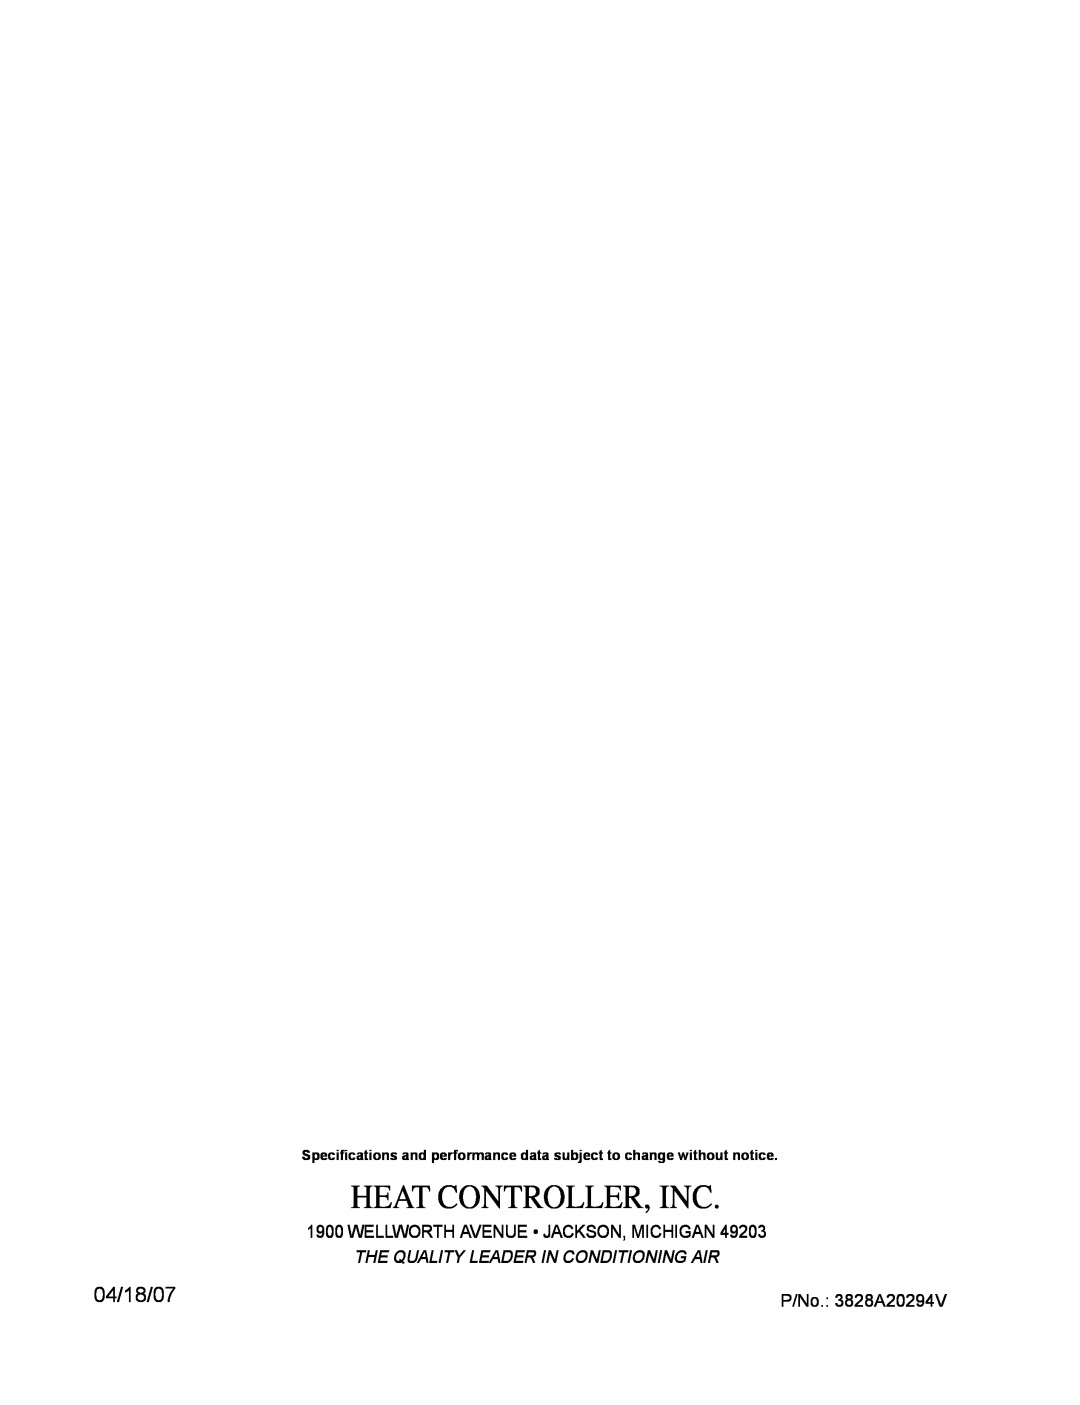 Heat Controller BG-101A, BG-81A P/No. 3828A20294V, Heat Controller, Inc, 04/18/07, The Quality Leader In Conditioning Air 